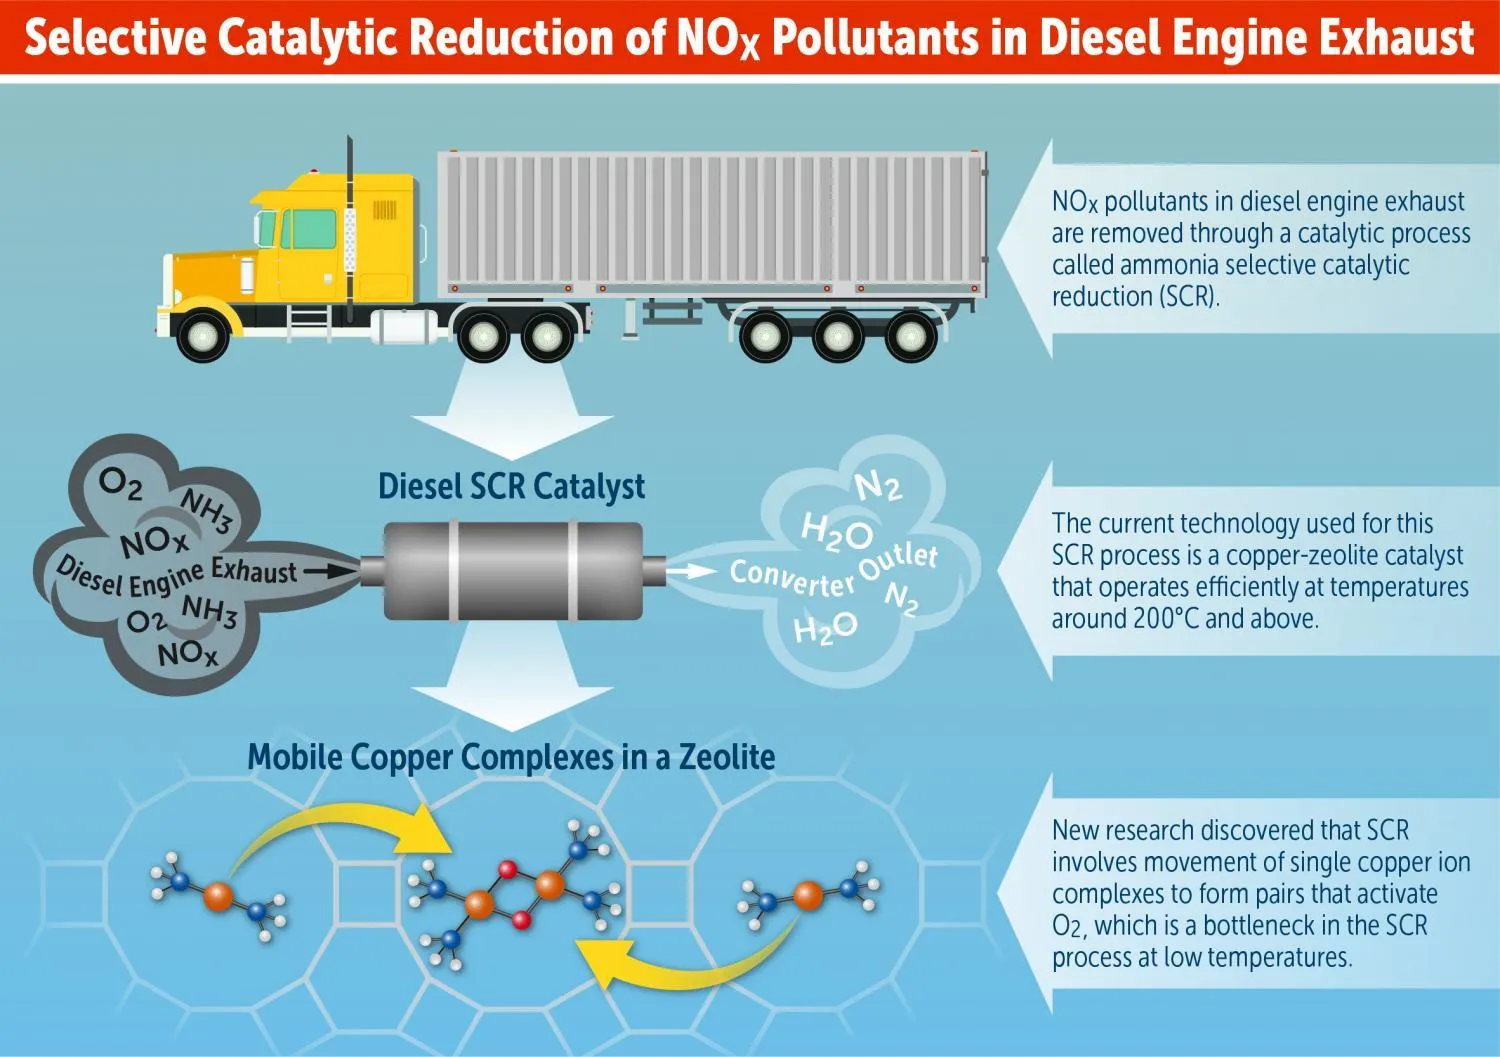 An informative graphic titled 'Selective Catalytic Reduction of NOx Pollutants in Diesel Vehicle Exhaust'. The image illustrates a yellow diesel truck beside a 'Diesel SCR Catalyst'—a cylindrical device responsible for treating diesel exhaust. As the exhaust gases pass through the catalyst, harmful NOx compounds interact with ammonia (NH₃) and oxygen (O₂), undergoing a transformation to produce harmless nitrogen (N₂) and water (H₂O). To the right, the infographic explains that NOx pollutants in diesel exhaust are removed using an ammonia selective catalytic reduction (SCR) process. This process traditionally relies on a copper-zeolite catalyst that functions efficiently at temperatures around 200°C and above. At the bottom, there's a closer look at the catalyst on a molecular level, showcasing 'Mobile Copper Complexes in a Zeolite'. New research indicates the movement of single copper ion complexes forming pairs that activate oxygen, a previously identified bottleneck in the SCR process at lower temperatures.